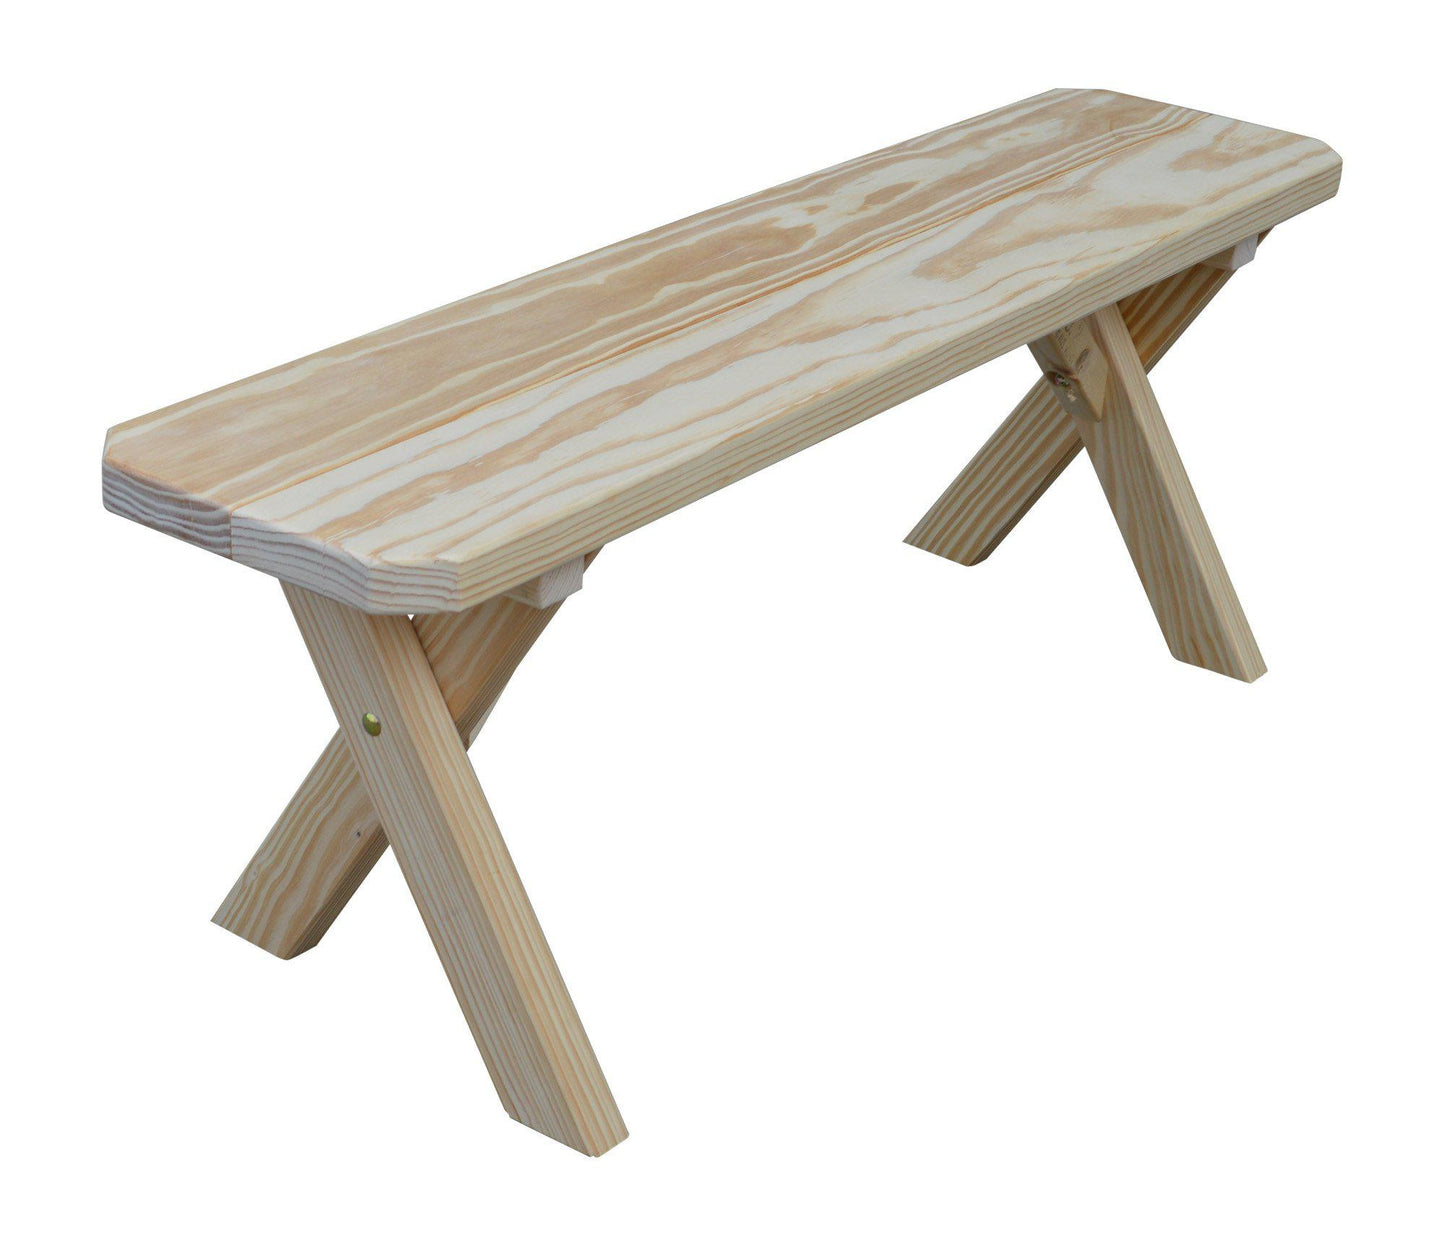 A&L Furniture Co. Yellow Pine 44" Crossleg Bench Only - LEAD TIME TO SHIP 10 BUSINESS DAYS